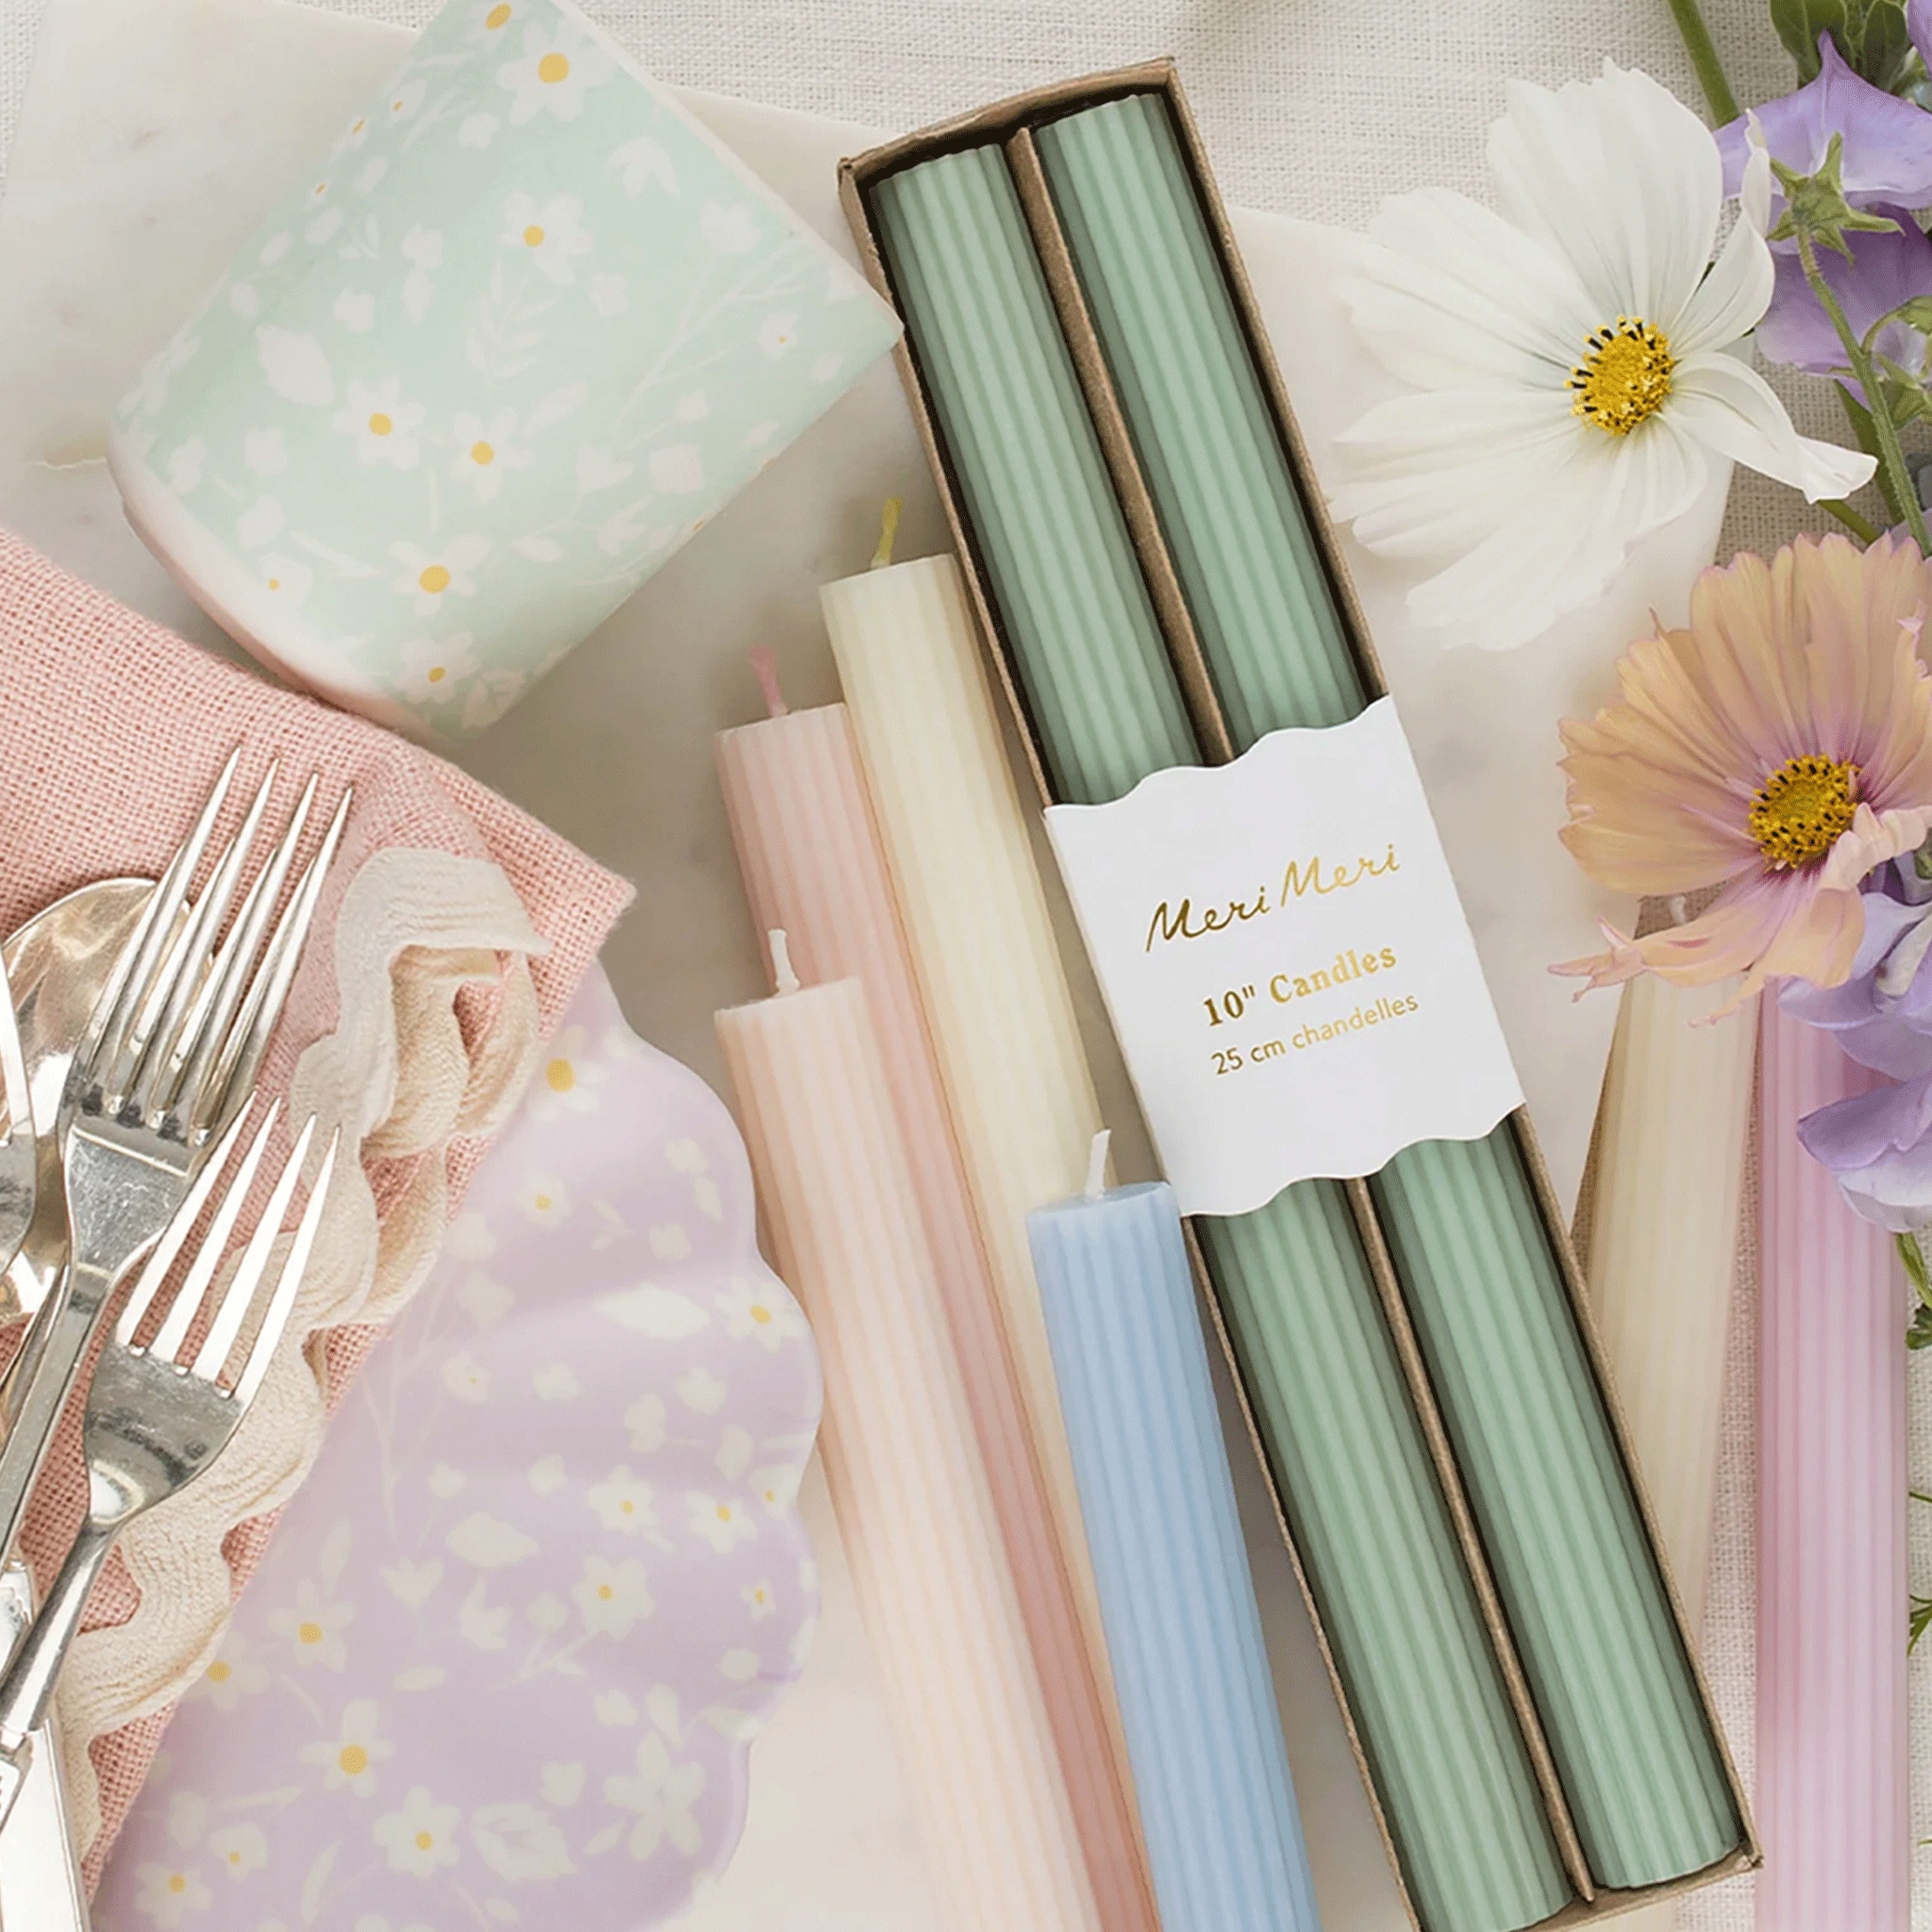 On a table scape is all the colors of the table candles alongside pastel tableware and flowers. 